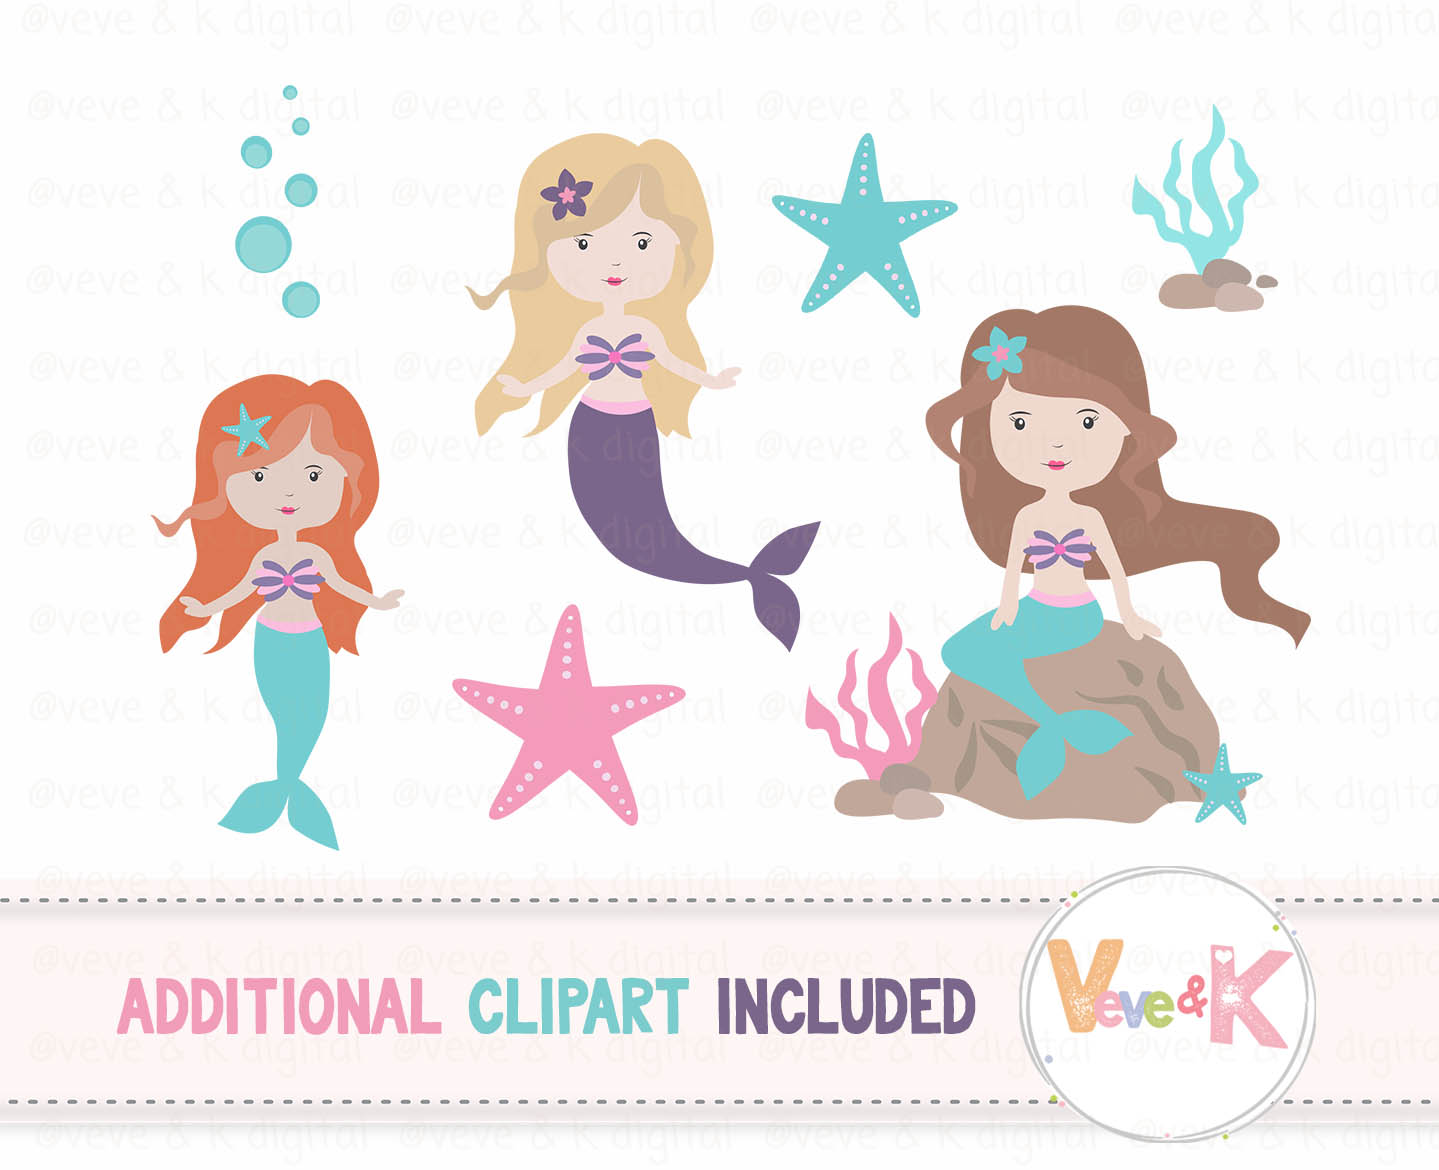 Mermaid clipart baby shower. Mermaids and papers pack